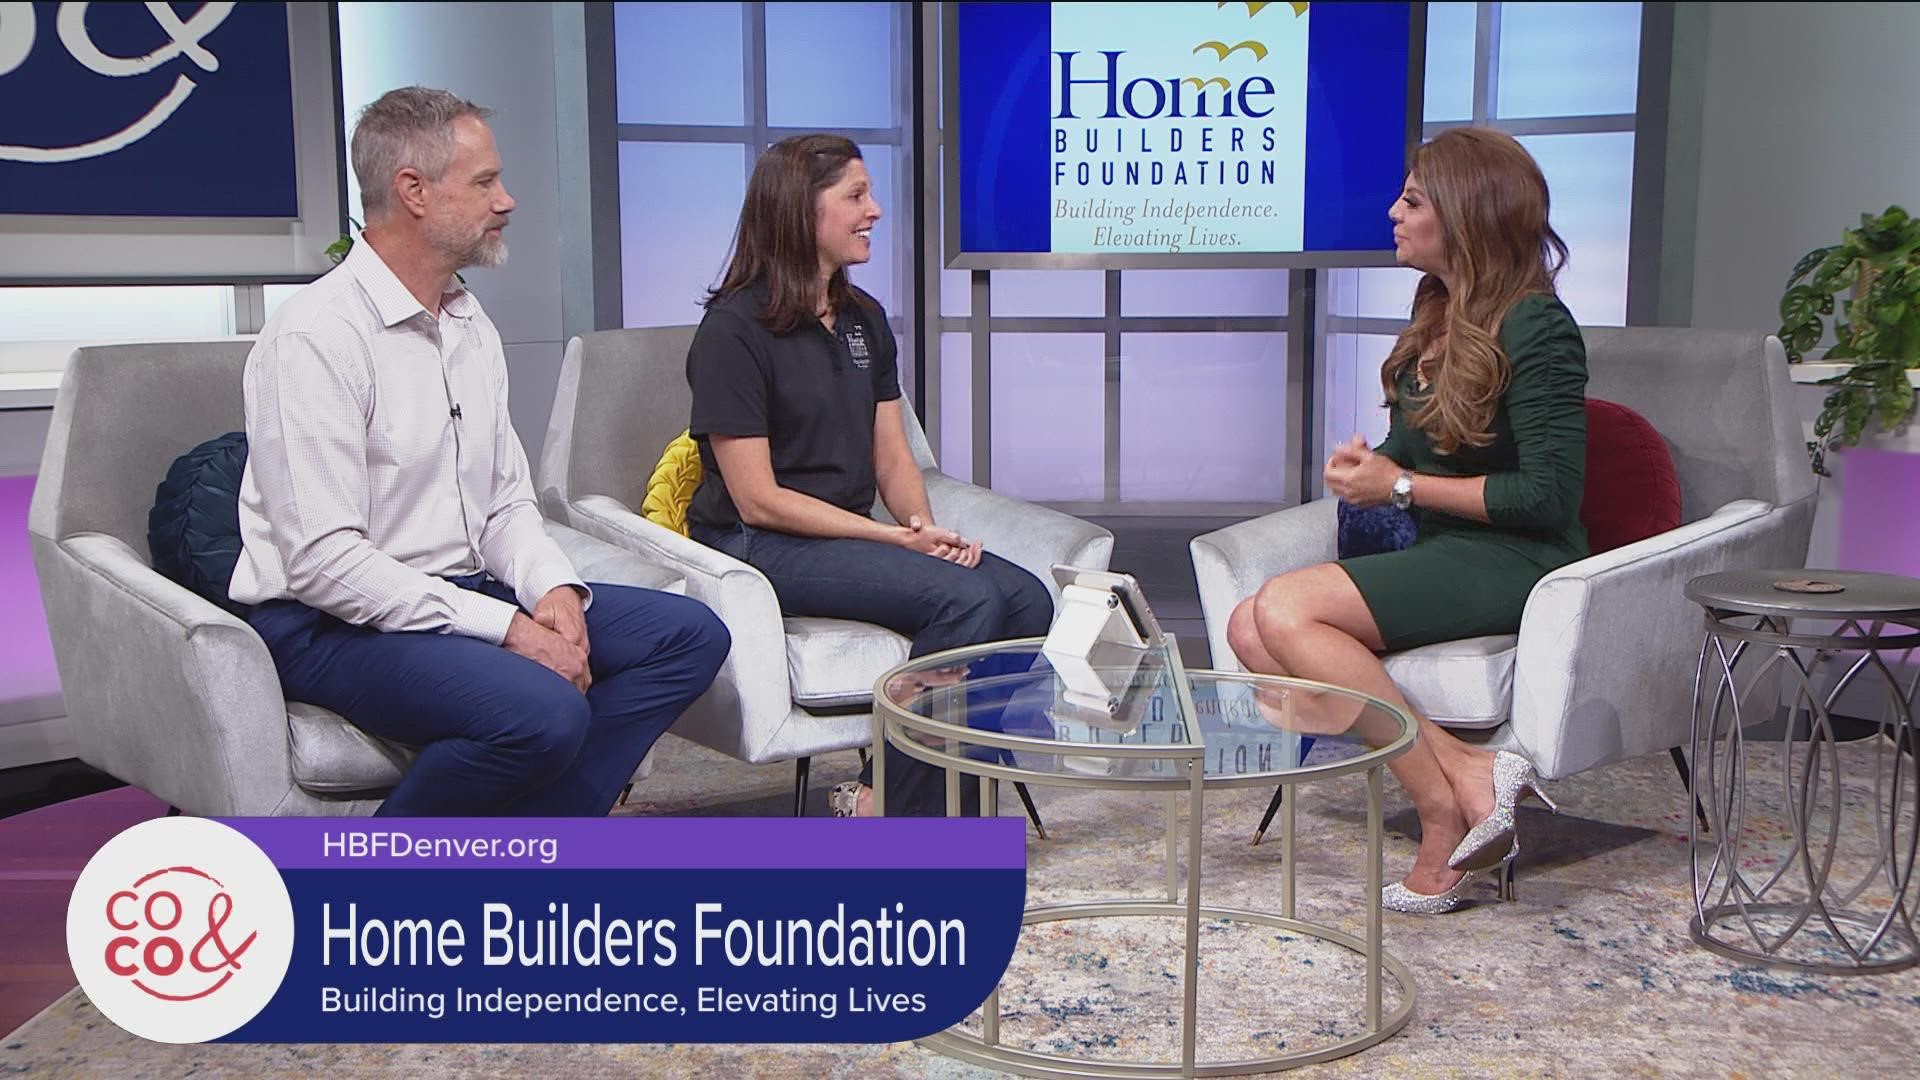 The Home Builders Foundation's 12th Annual Blitz Build is happening June 9th through 11th. Learn more at HBFDenver.org.